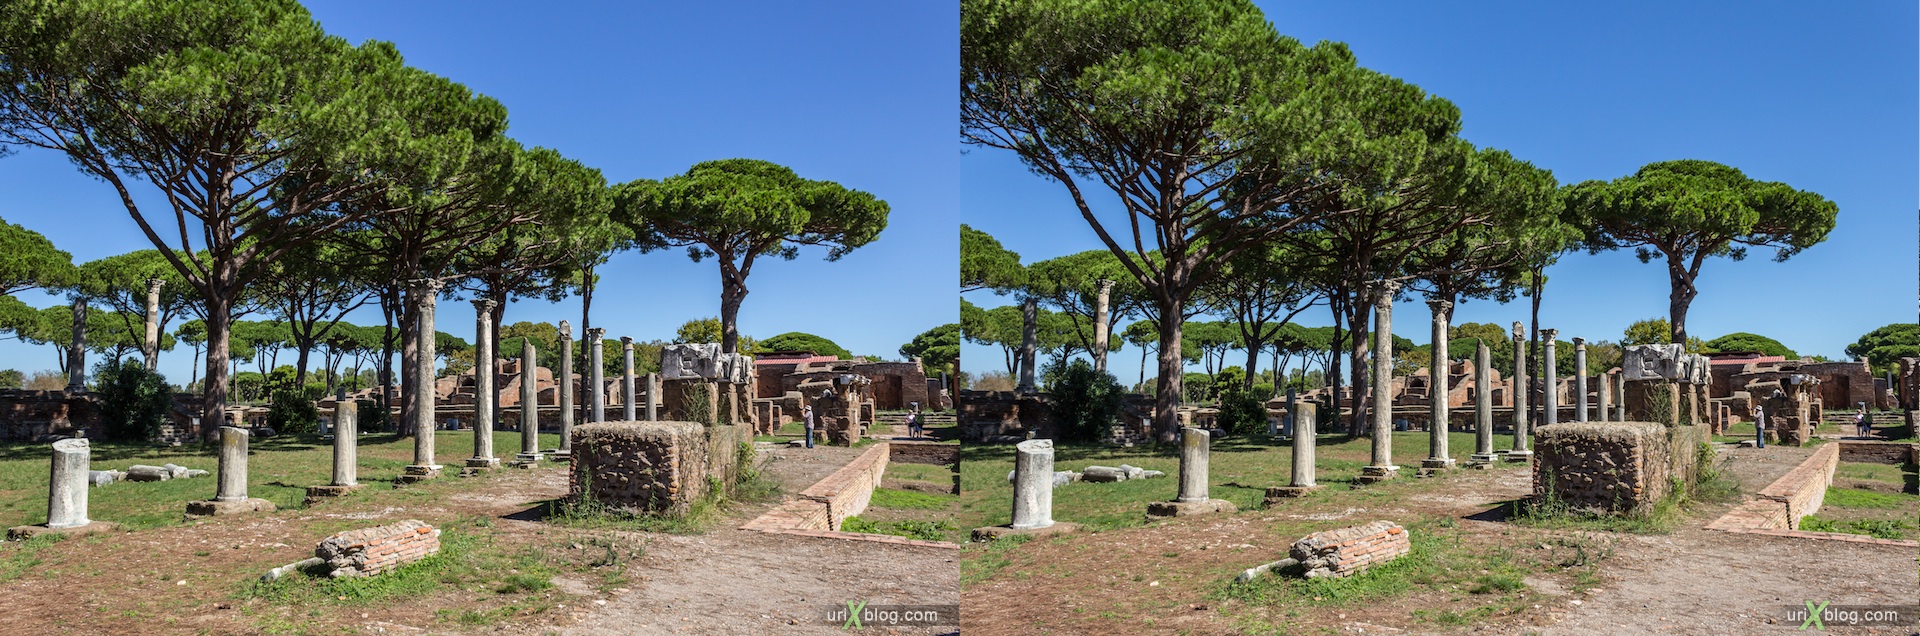 2012, Roman theater, Ostia Antica, Rome, Italy, ancient rome, city, 3D, stereo pair, cross-eyed, crossview, cross view stereo pair